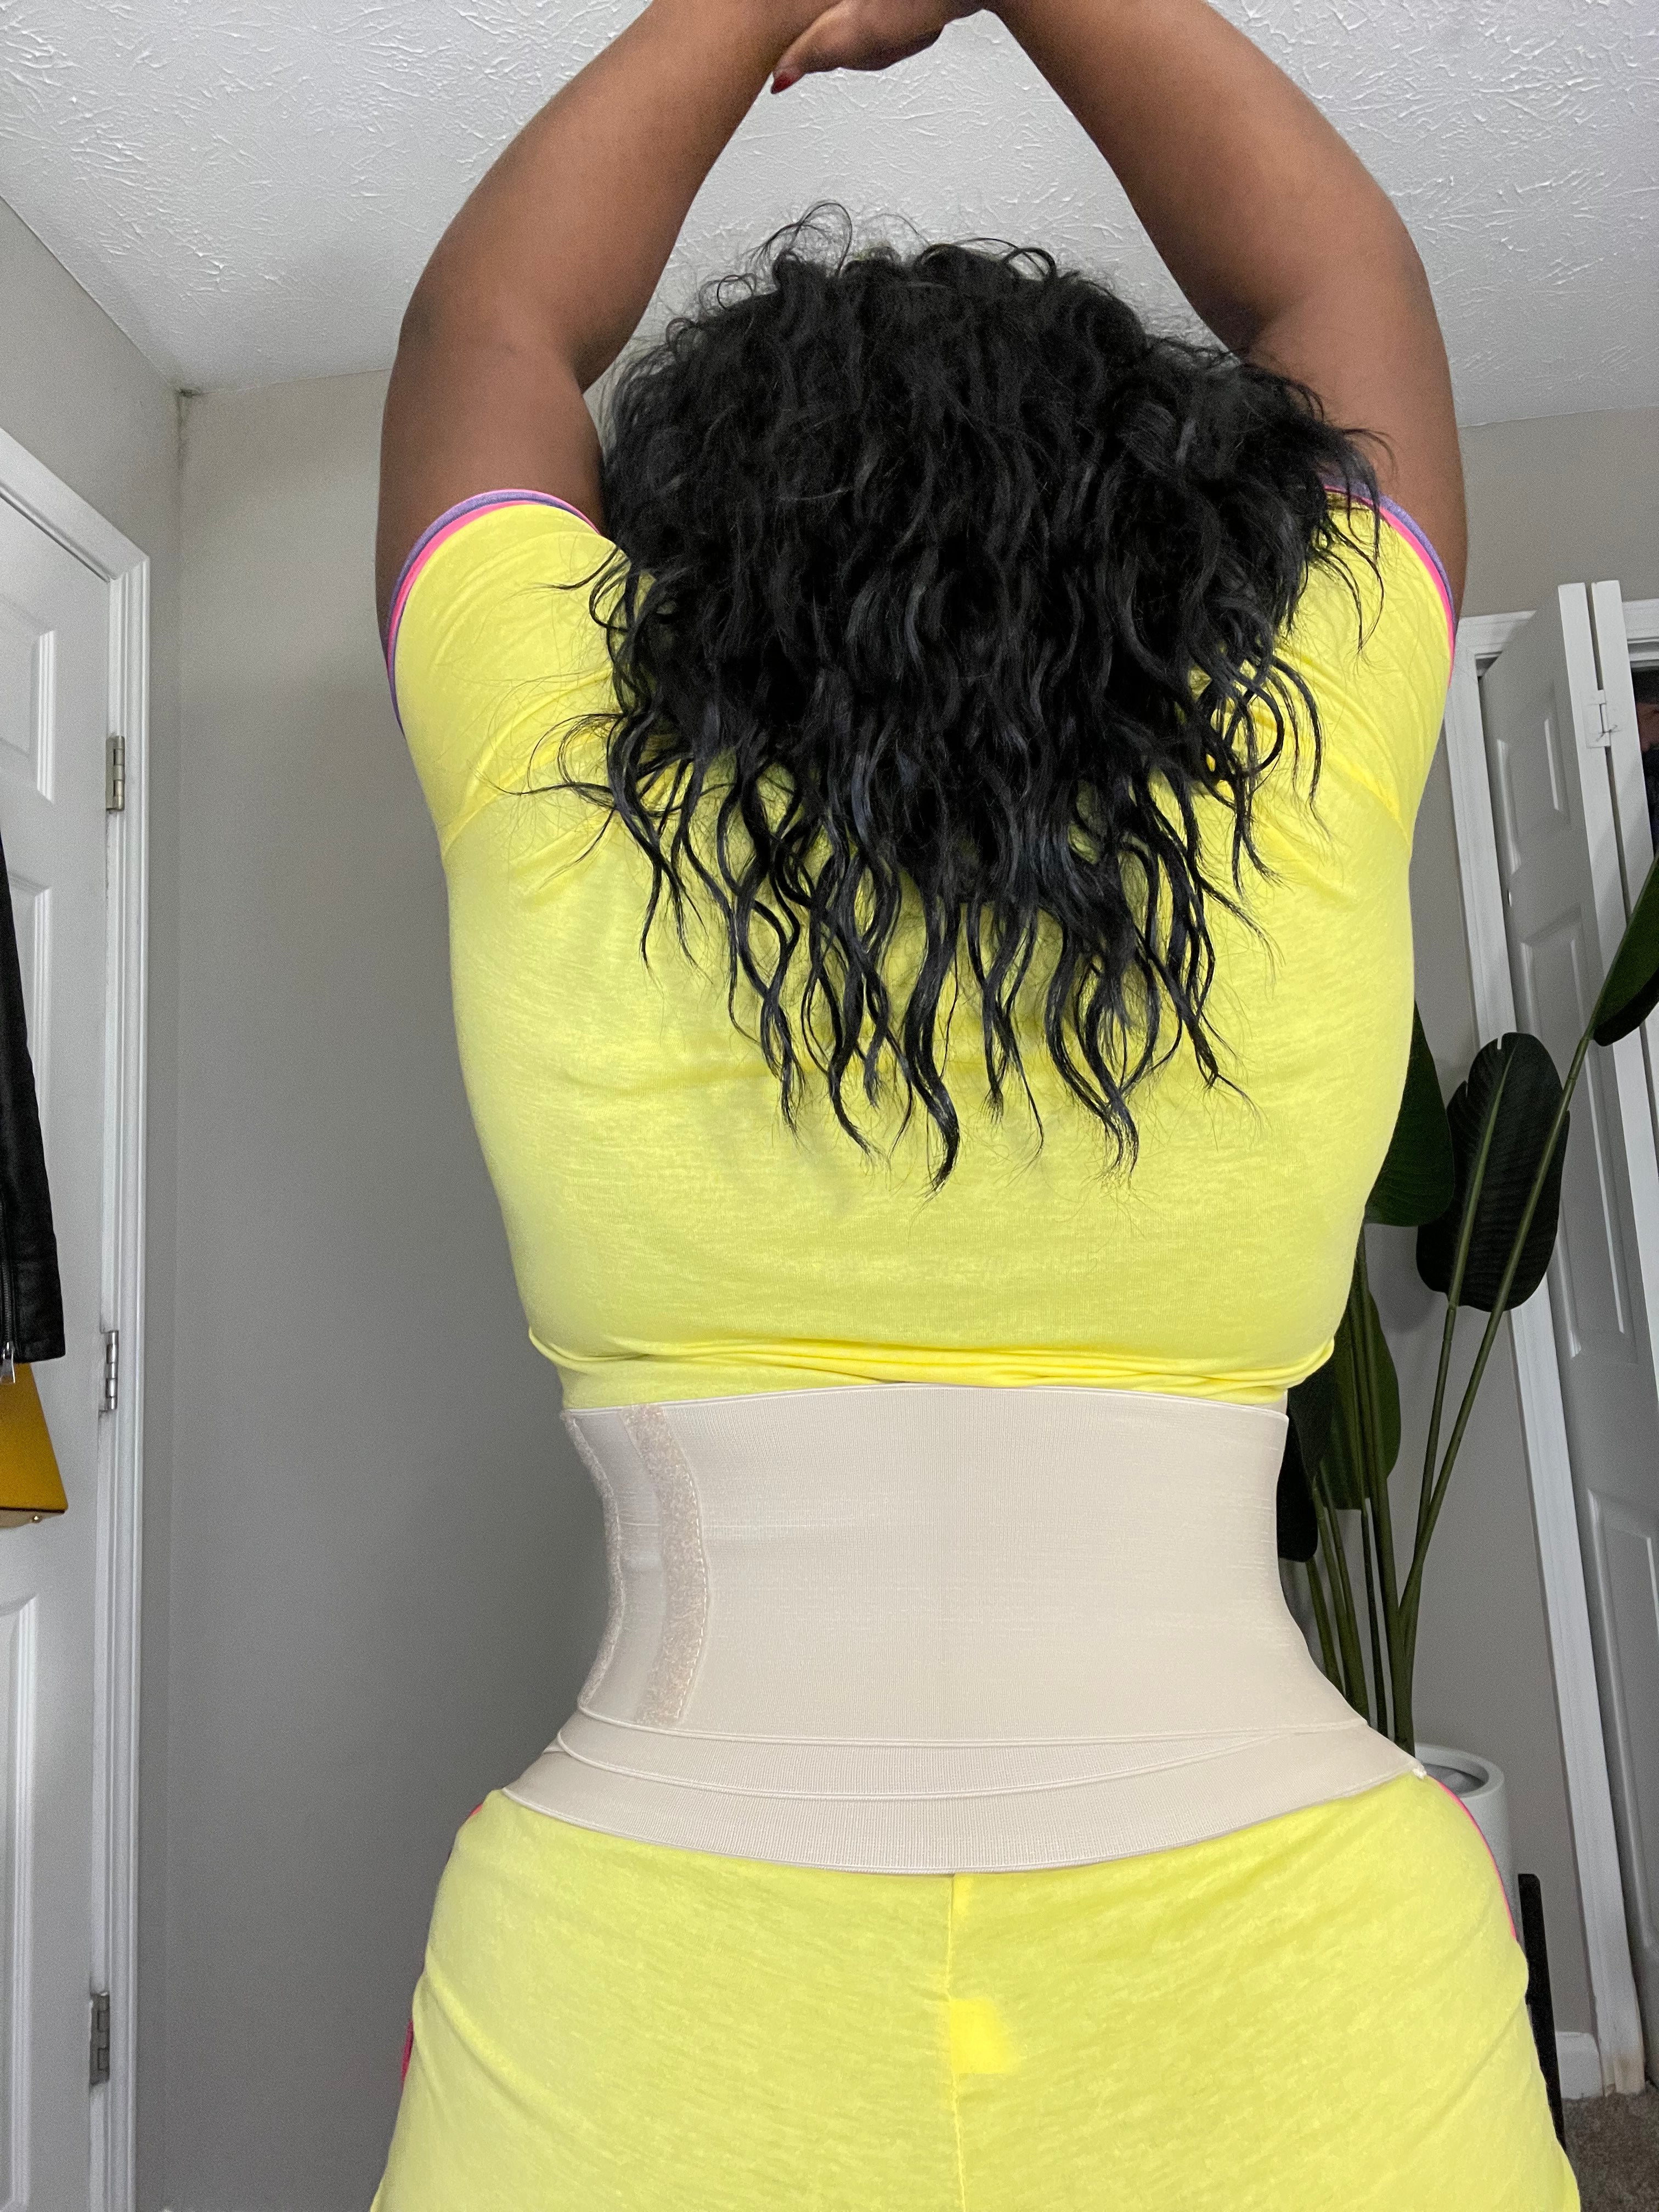 Wrap me tight- Waist trainer/trimmer